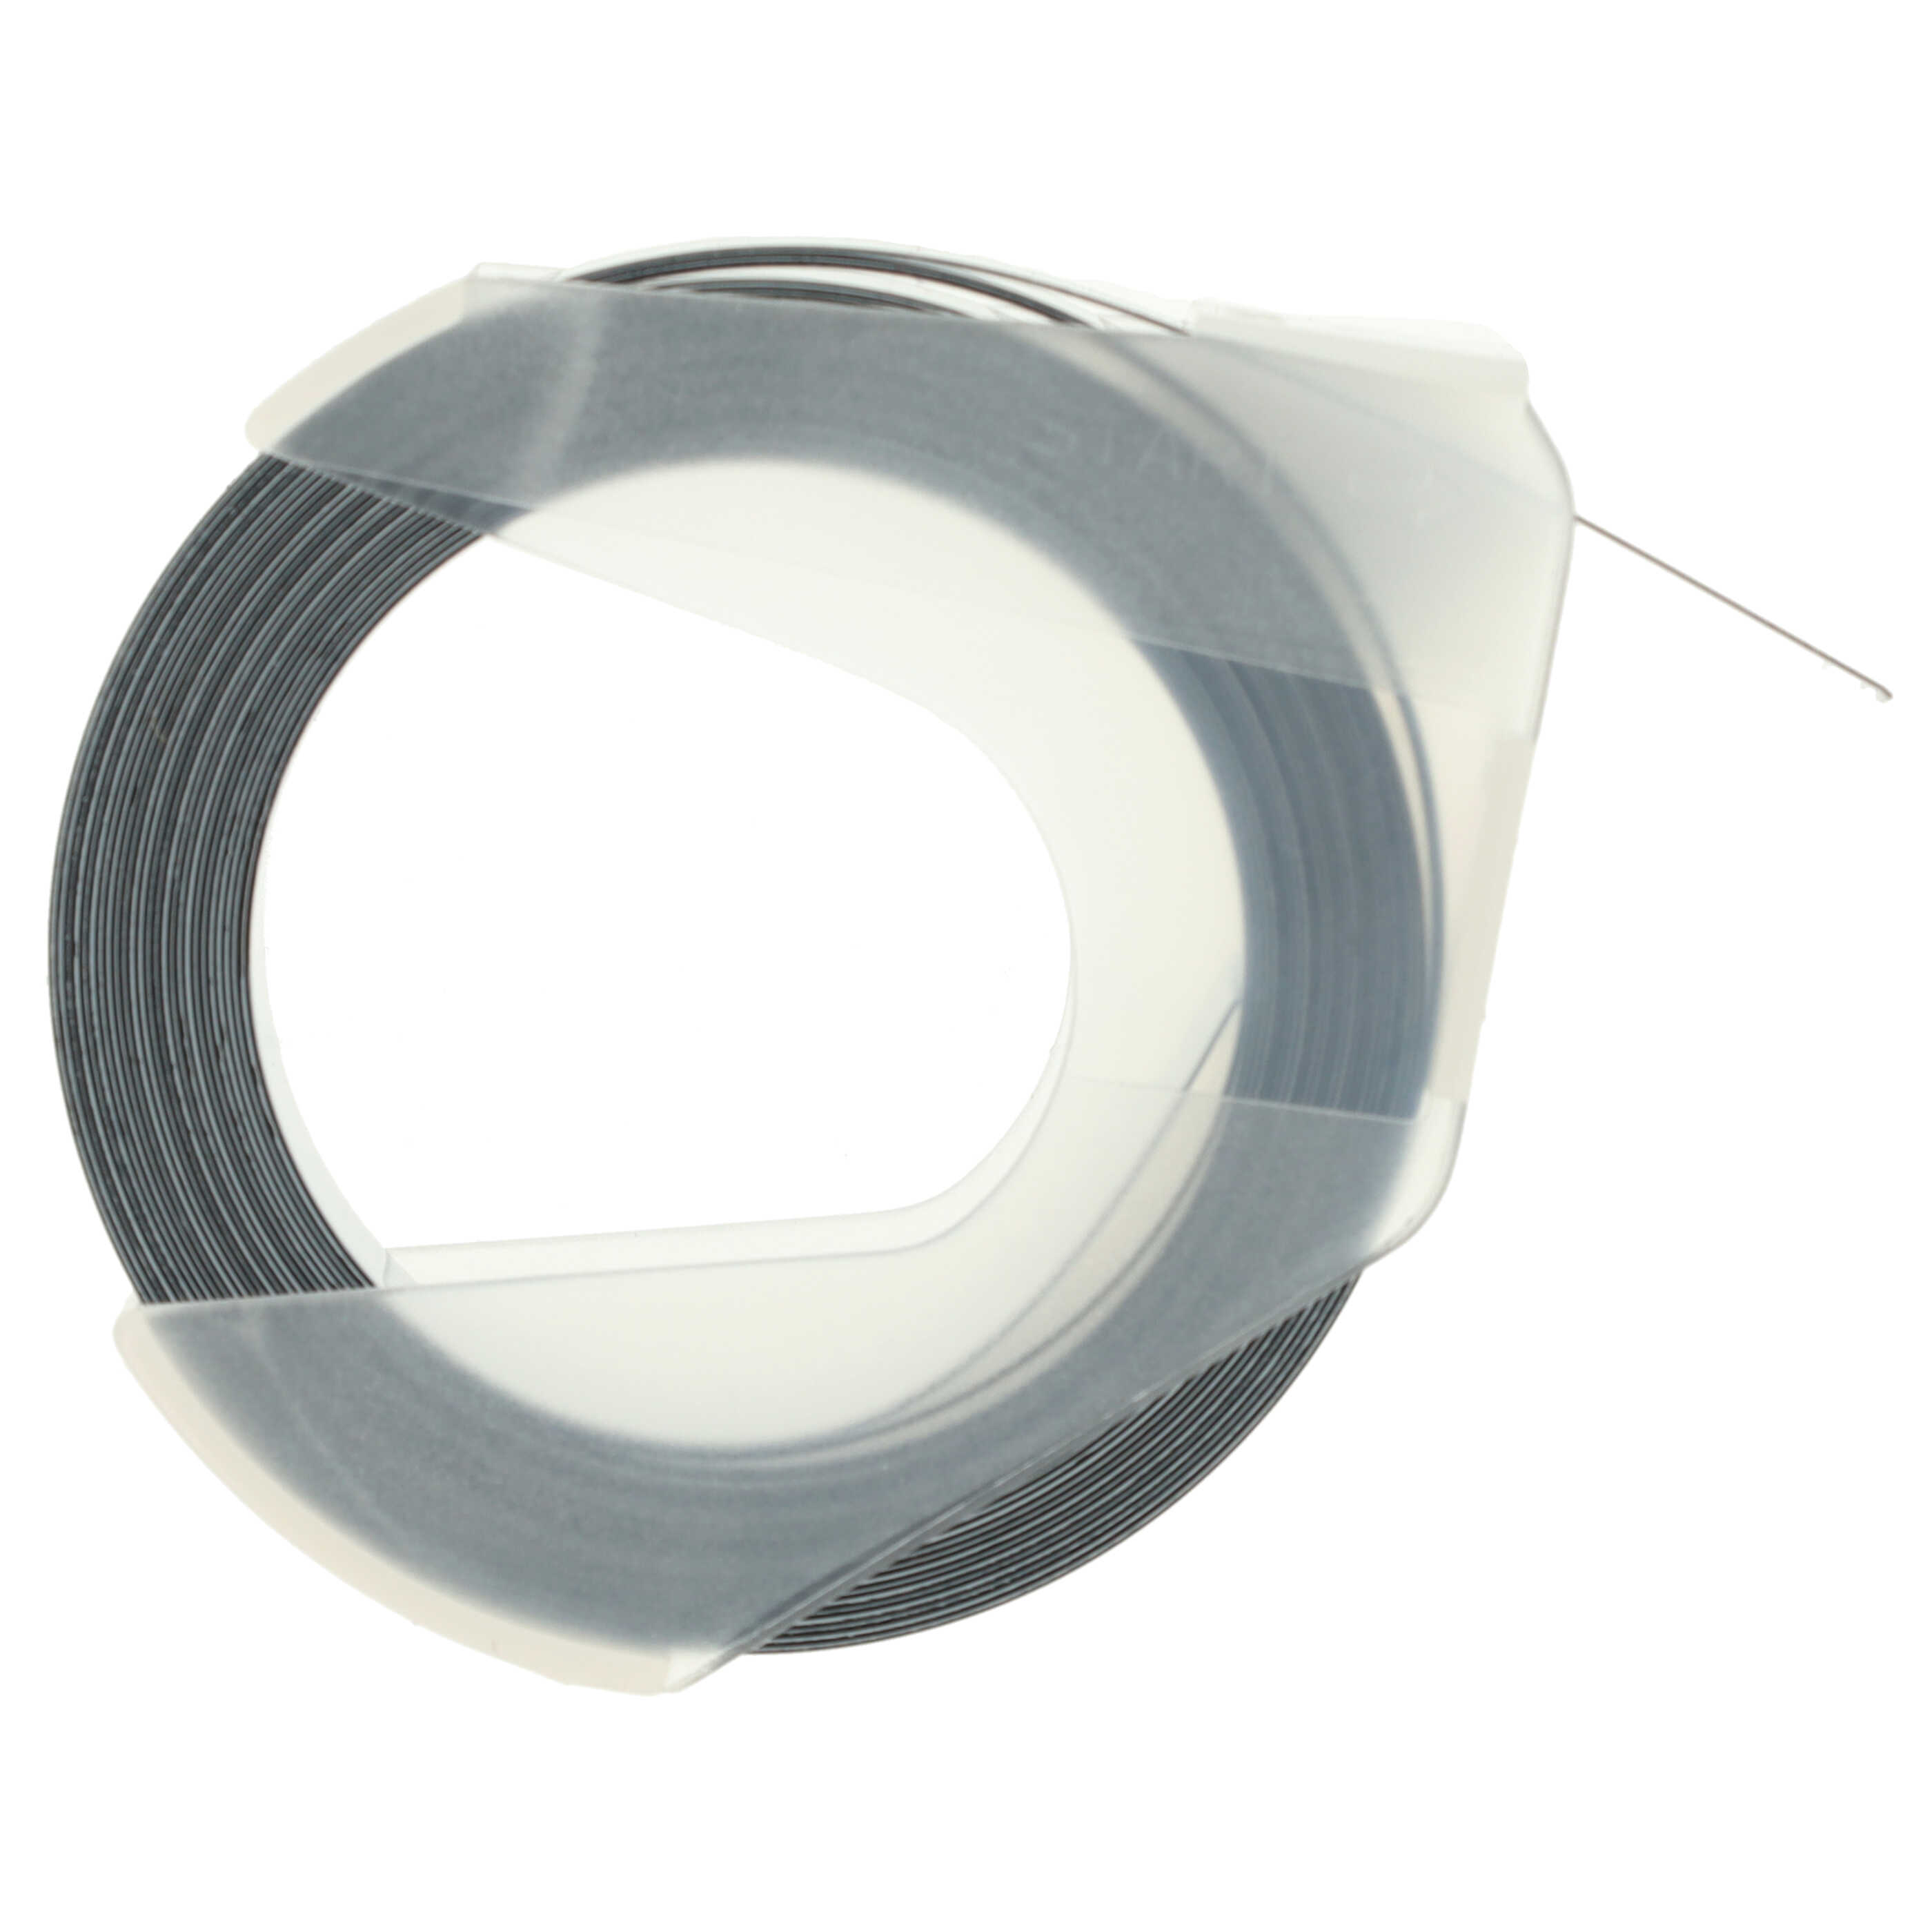 3D Embossing Label Tape as Replacement for Dymo 520109, 0898130, S0898130 - 9 mm White to Black